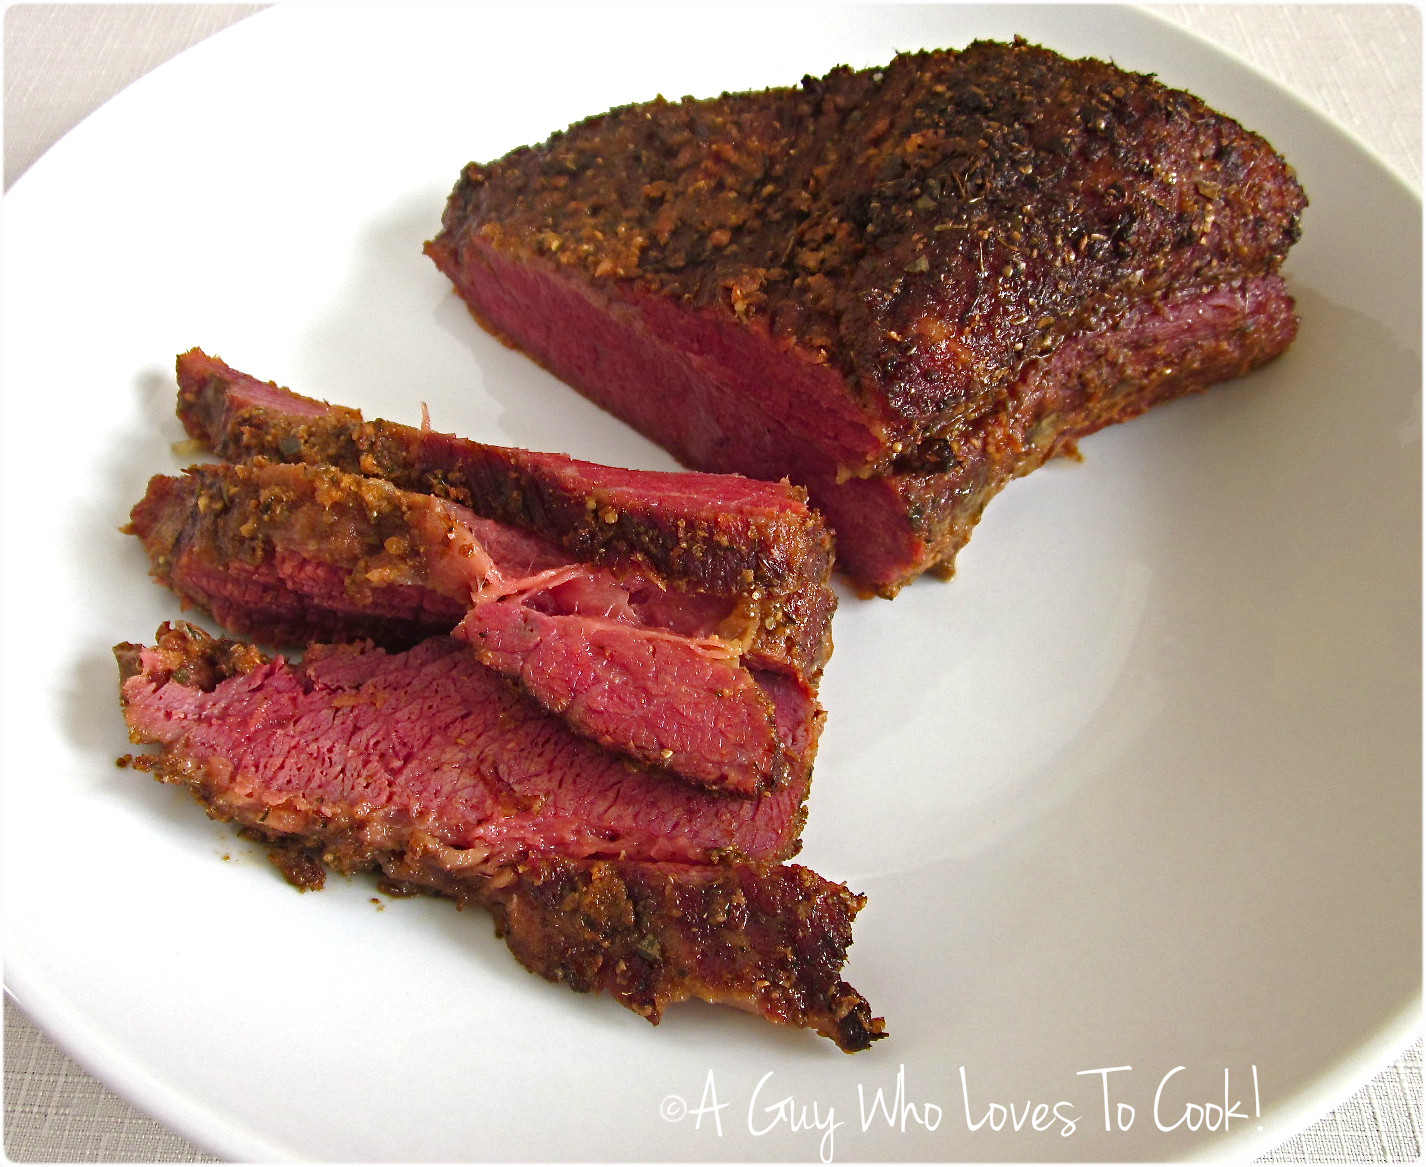 How To Make Corned Beef Brisket
 A Guy Who Loves to Cook Broasted Corned Beef Brisket